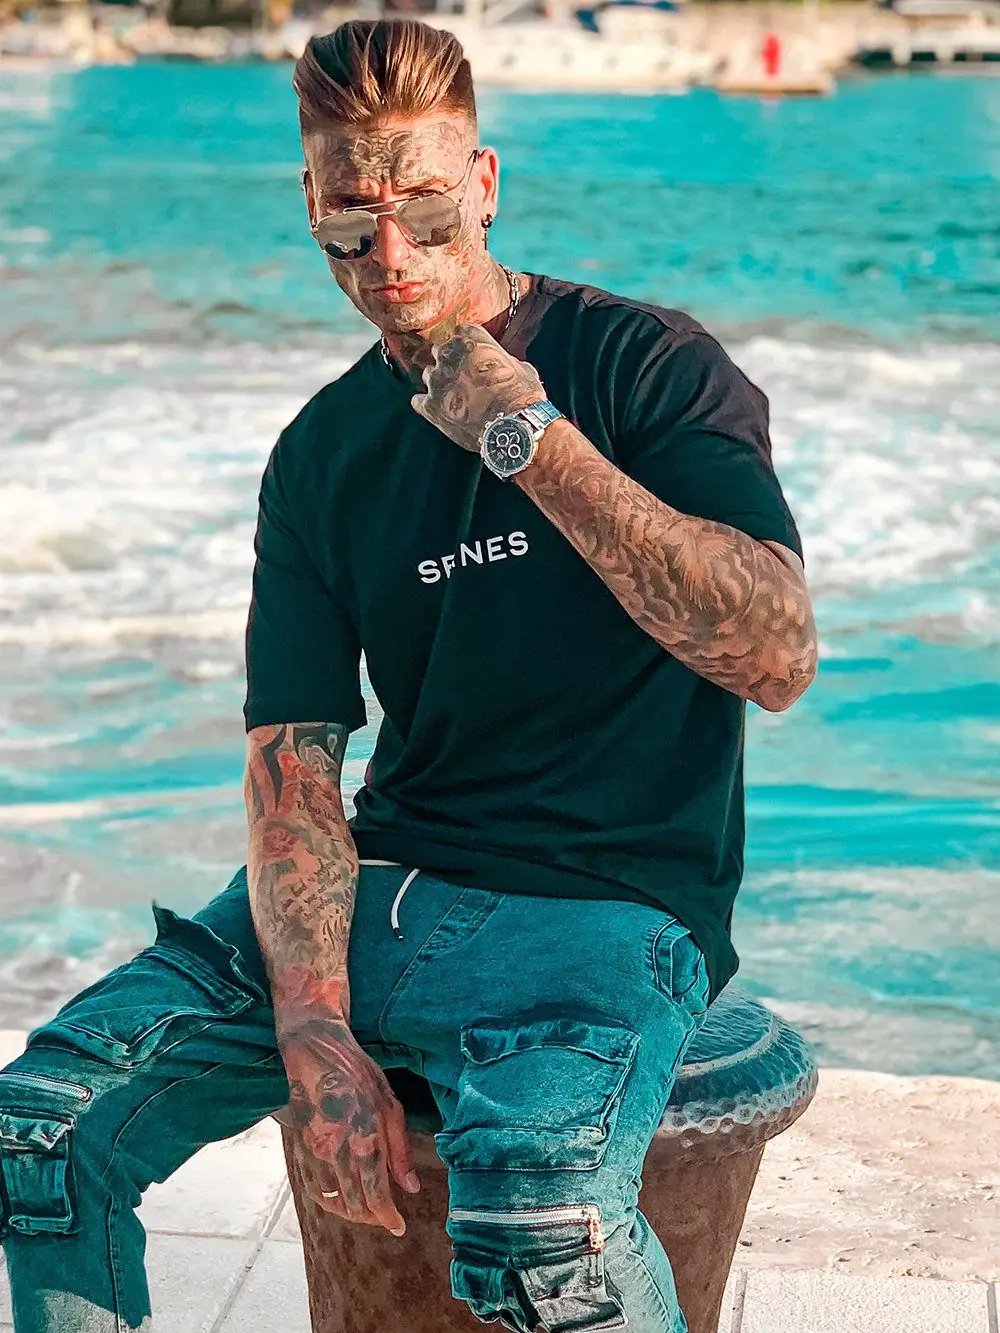 A man with tattoos and ripped jeans wearing THE ORIGINAL T-SHIRT sitting on a bench next to the ocean.